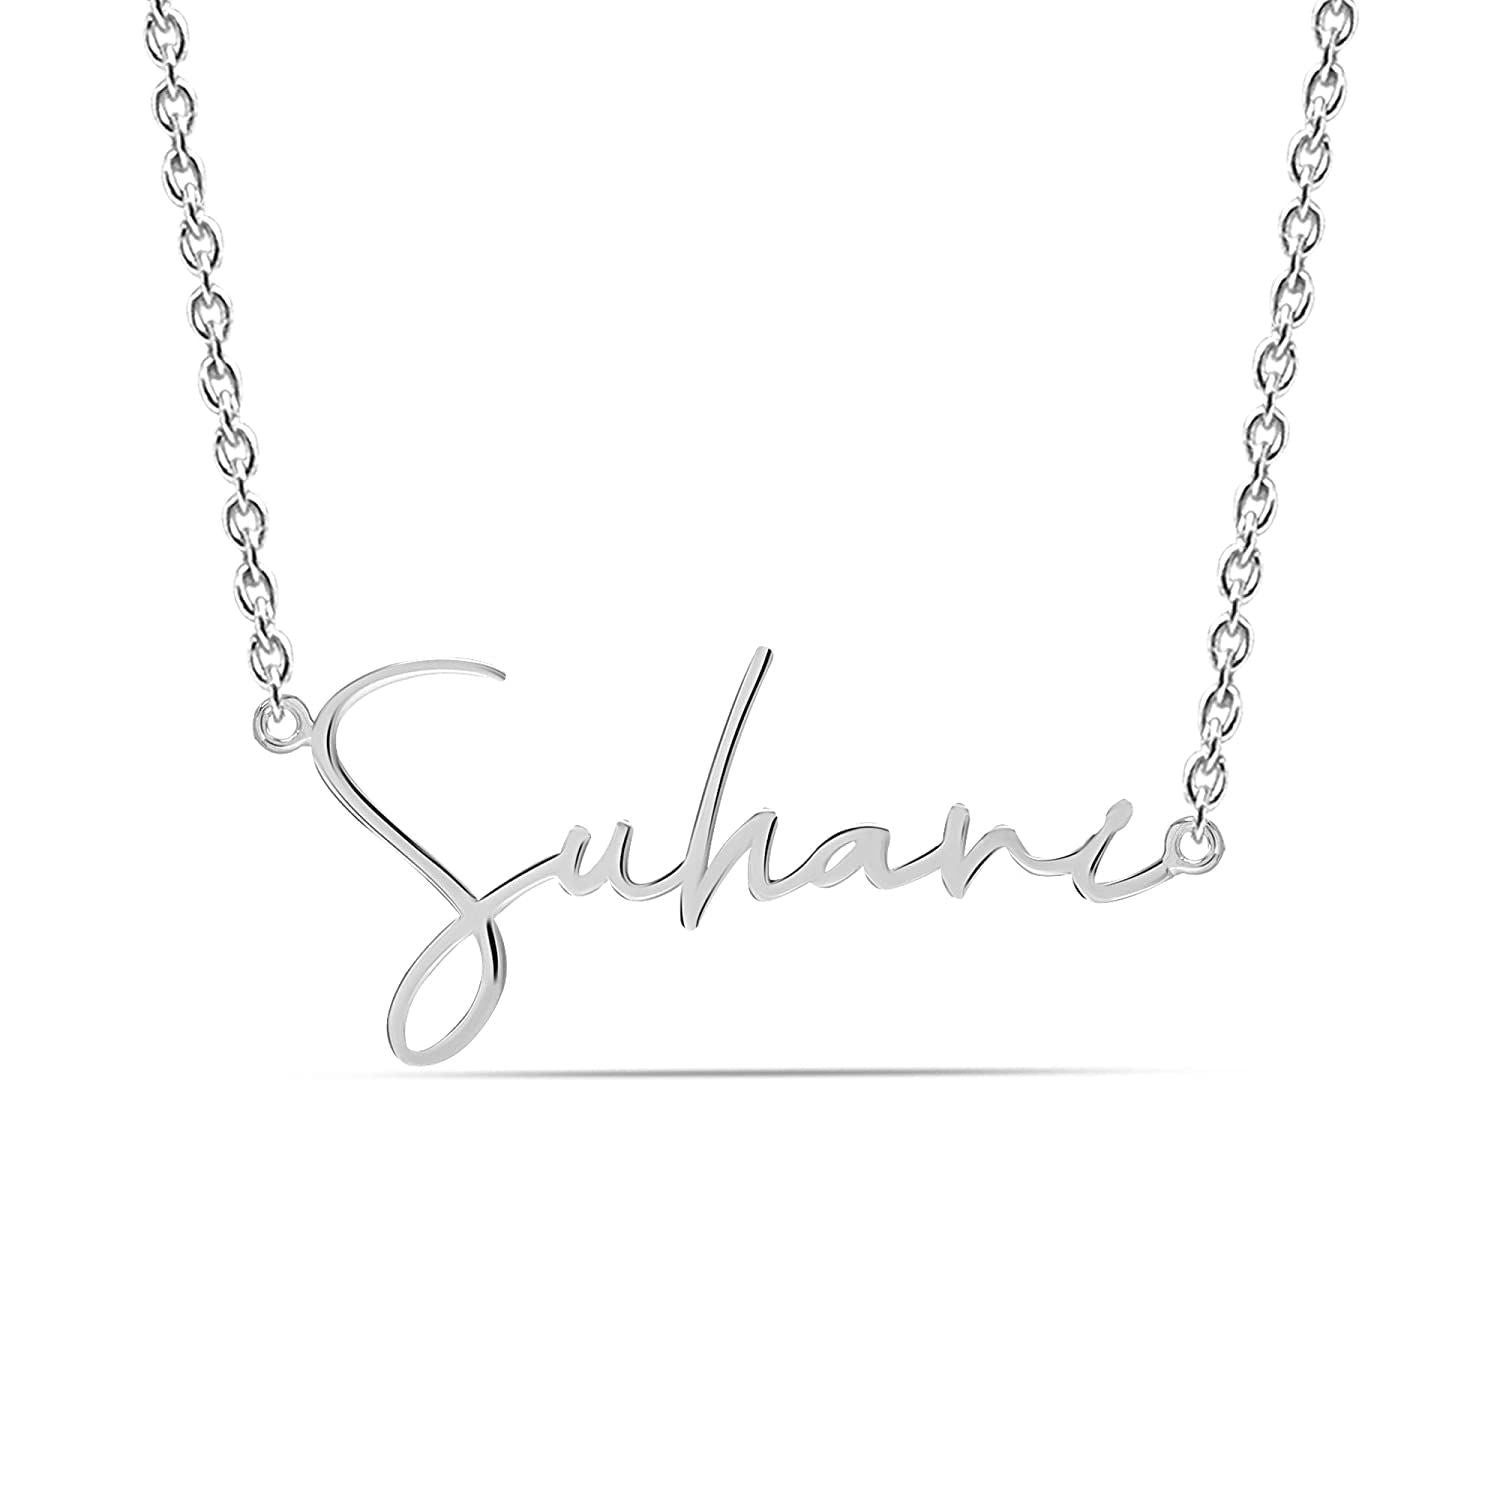 Personalised 925 Sterling Silver Name Necklace for Women Teen, Gift for Women Wife Her/Mother's Day, Birthday